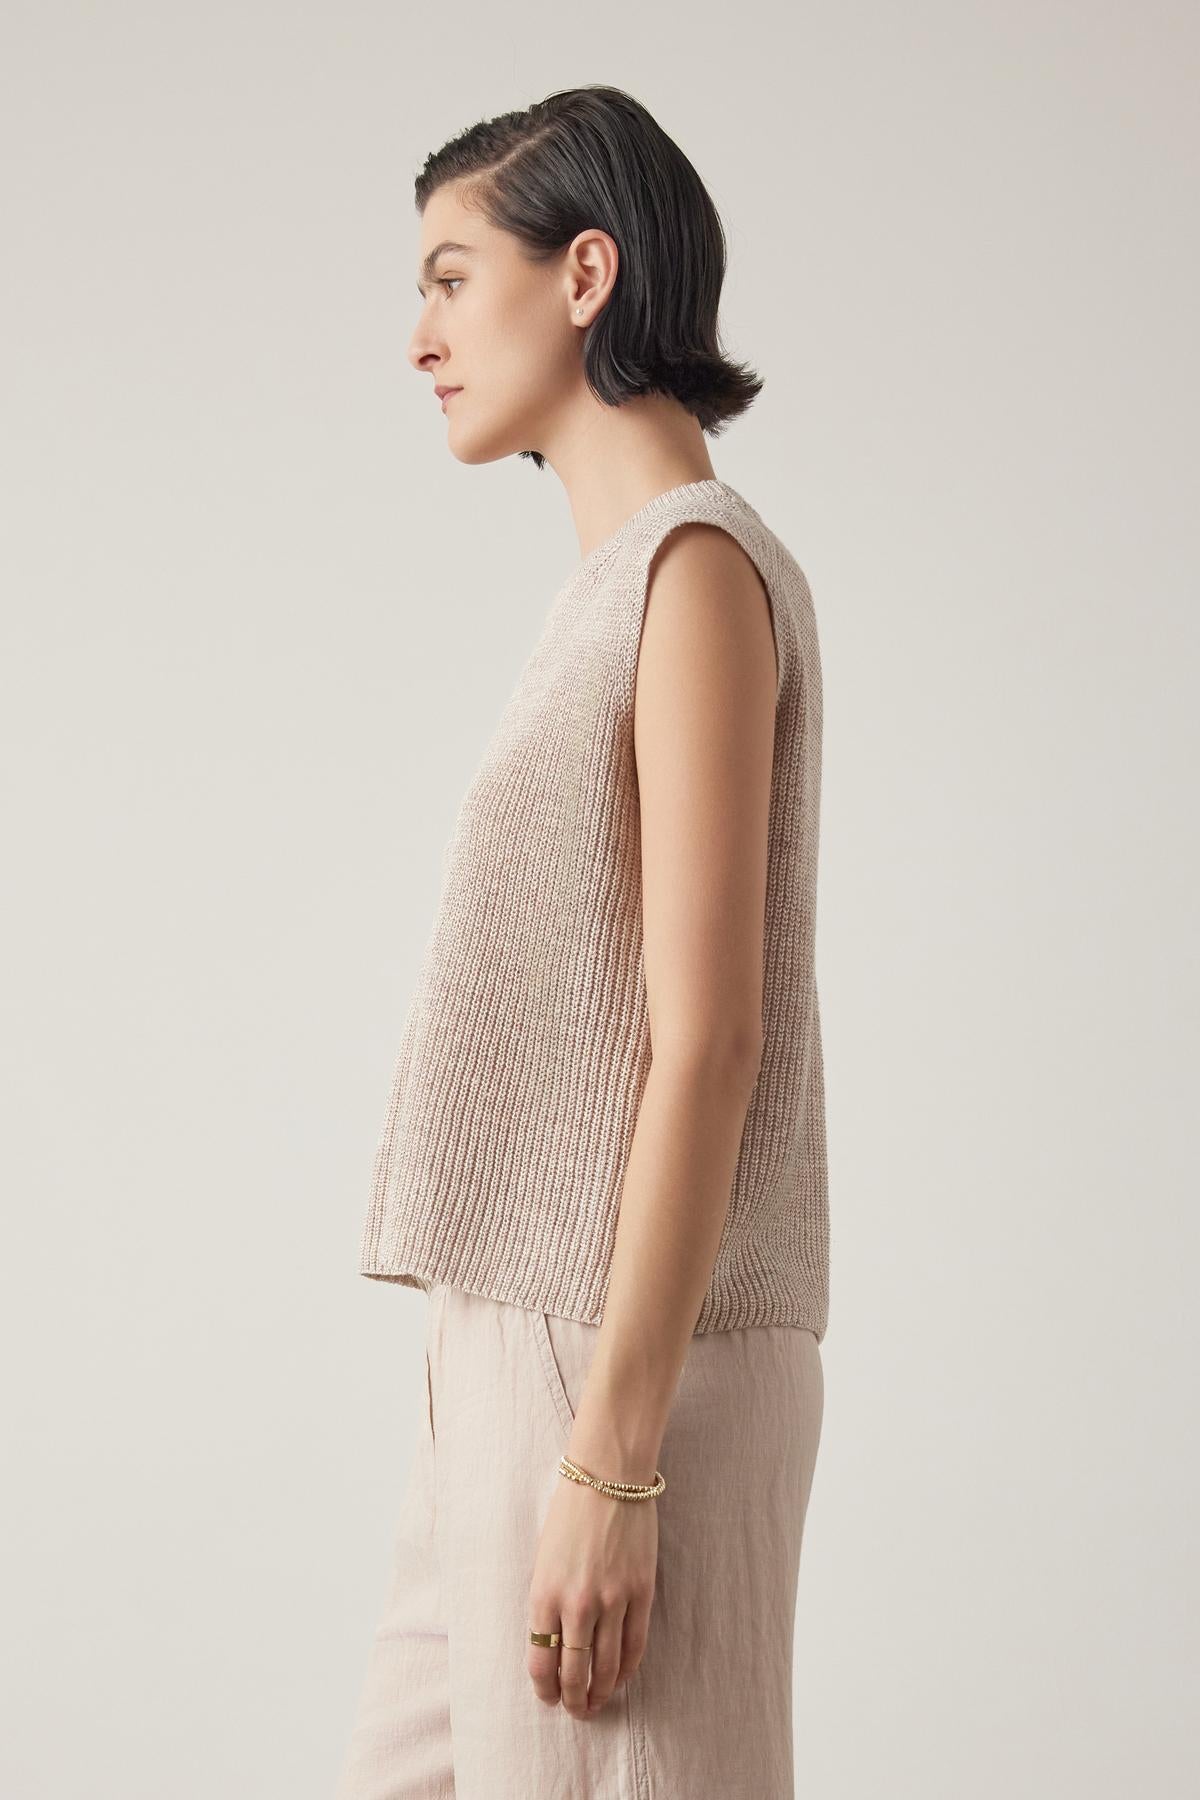 Side profile of a woman with short hair wearing a GARDENA LINEN SWEATER VEST by Velvet by Jenny Graham, standing against a neutral background.-36863284838593